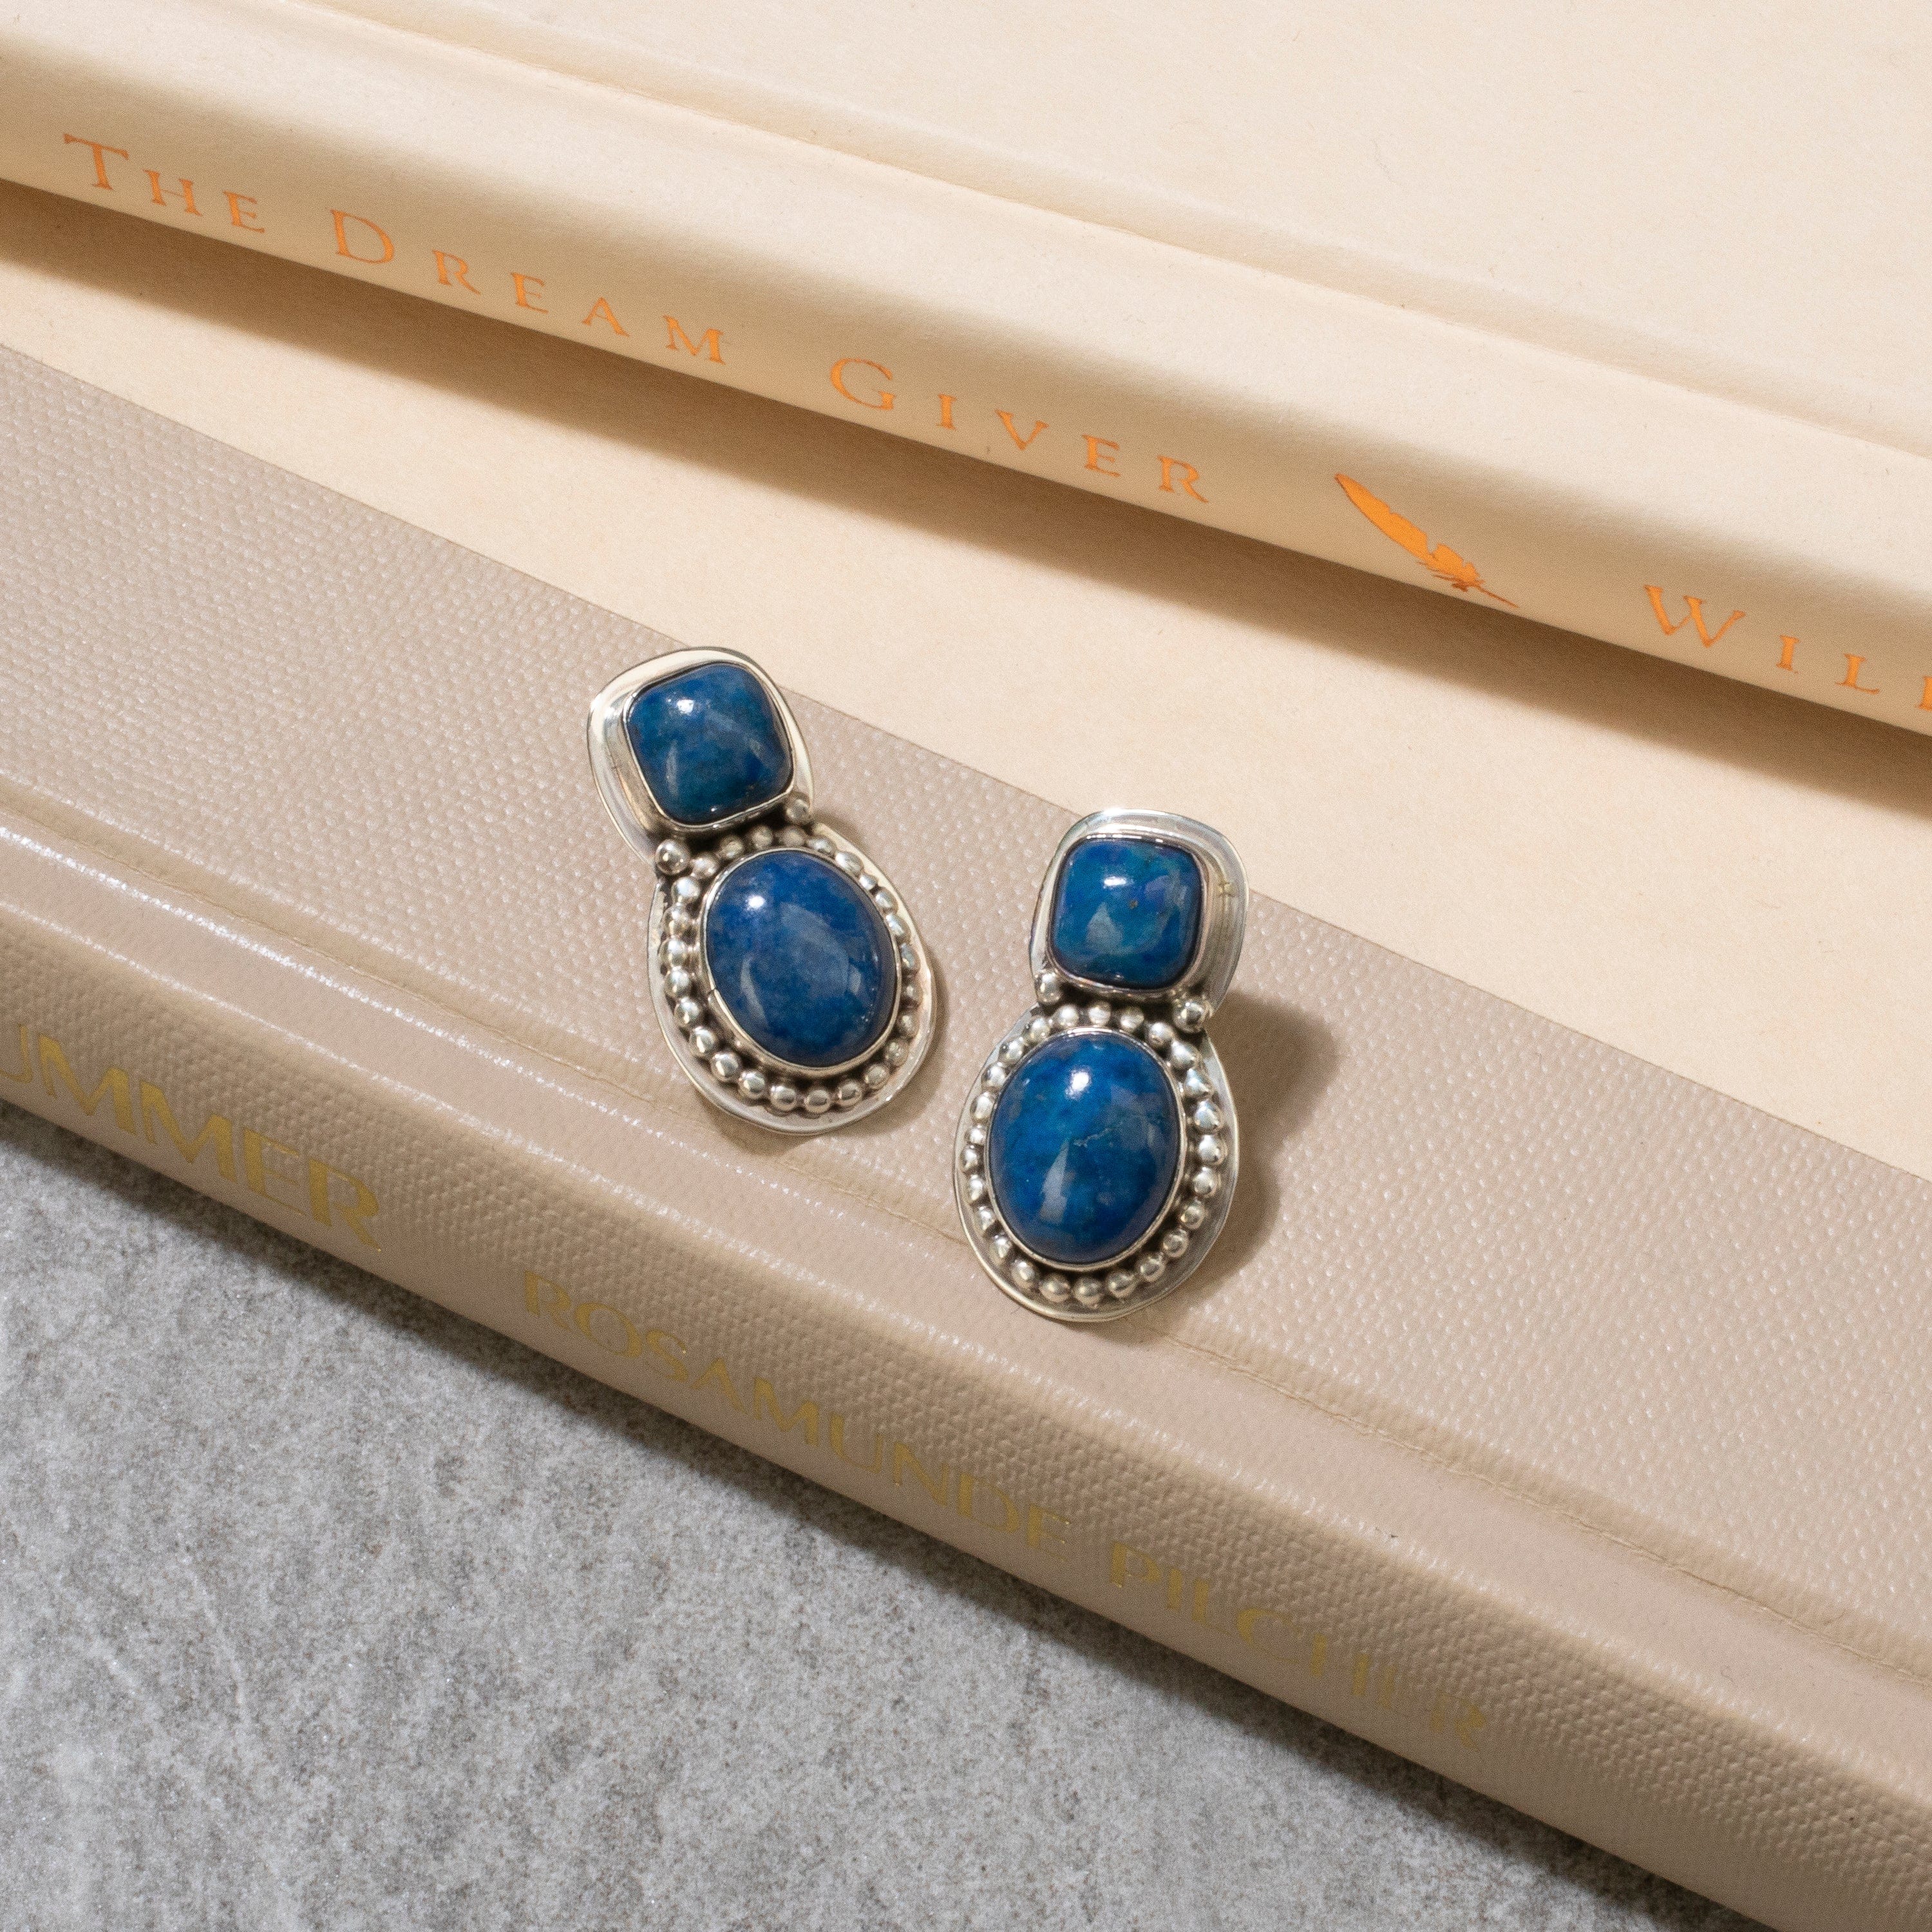 Kalifano Native American Jewelry Lapis Navajo USA Native American Made 925 Sterling Silver Earrings with Stud Backing NAE400.034